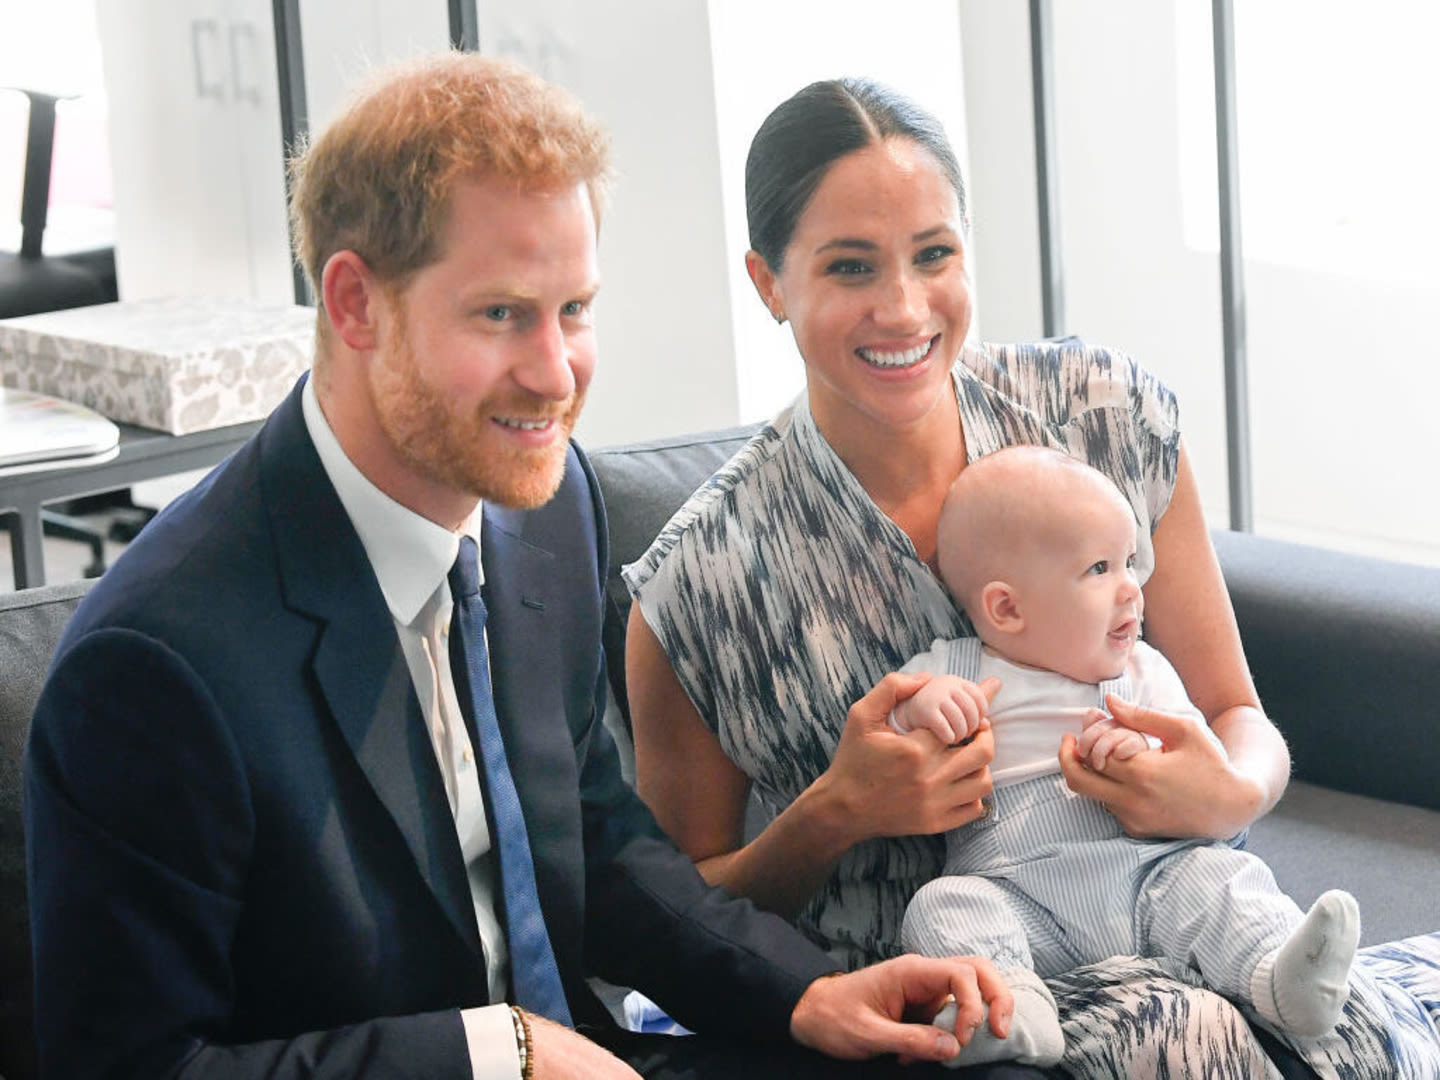 Fans Are Convinced Prince Harry & Meghan Markle’s Son Archie Has a Royal Doppelganger